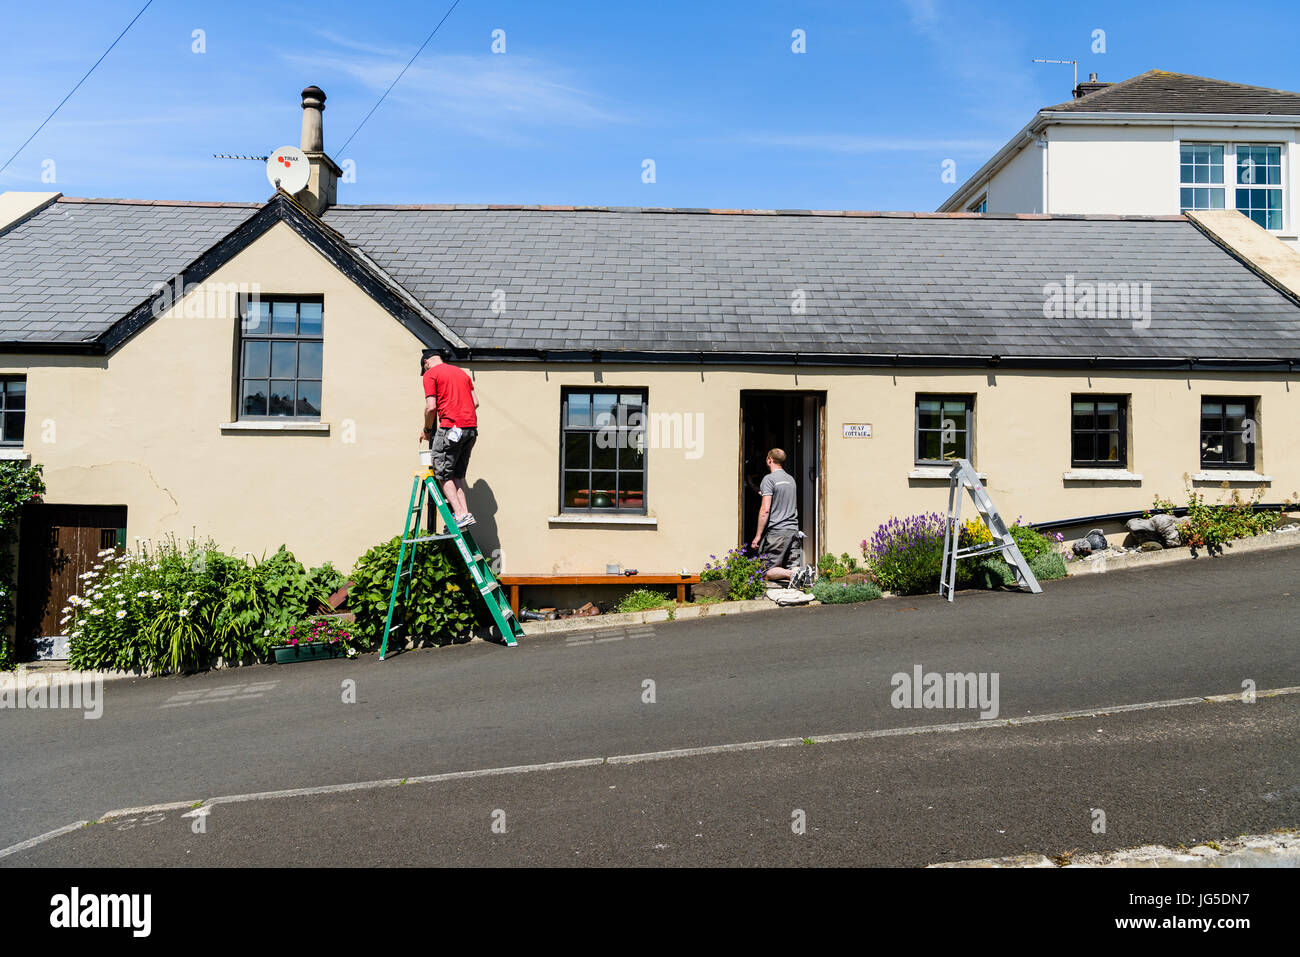 Two men painters painting a picturesque cottage on a steep hill road. Stock Photo